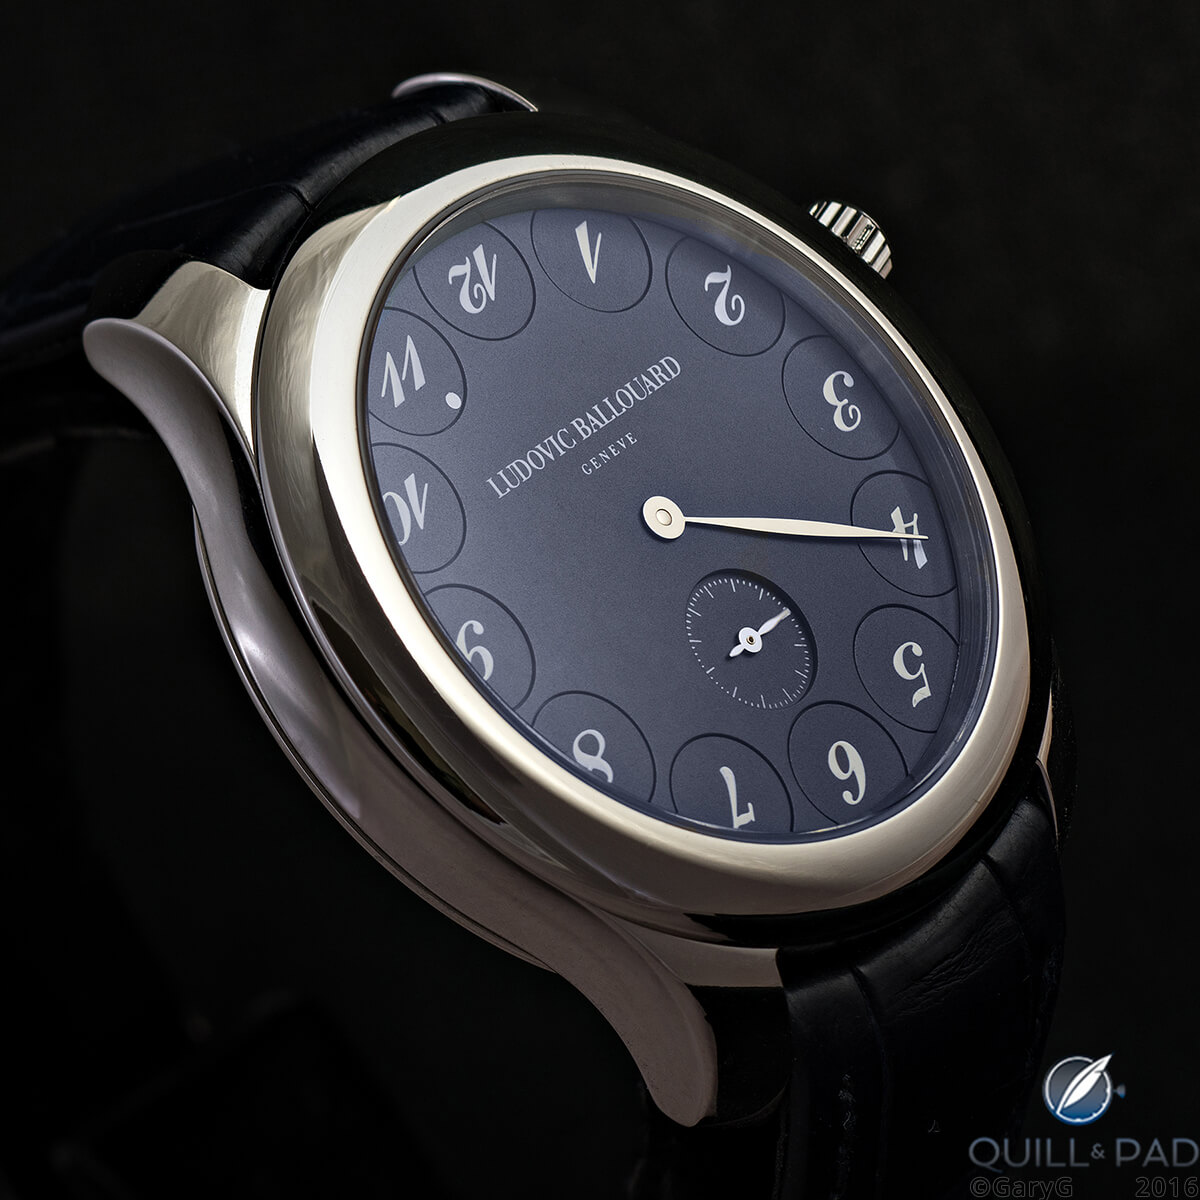 The author’s Ludovic Ballouard Upside Down in platinum with blue dial